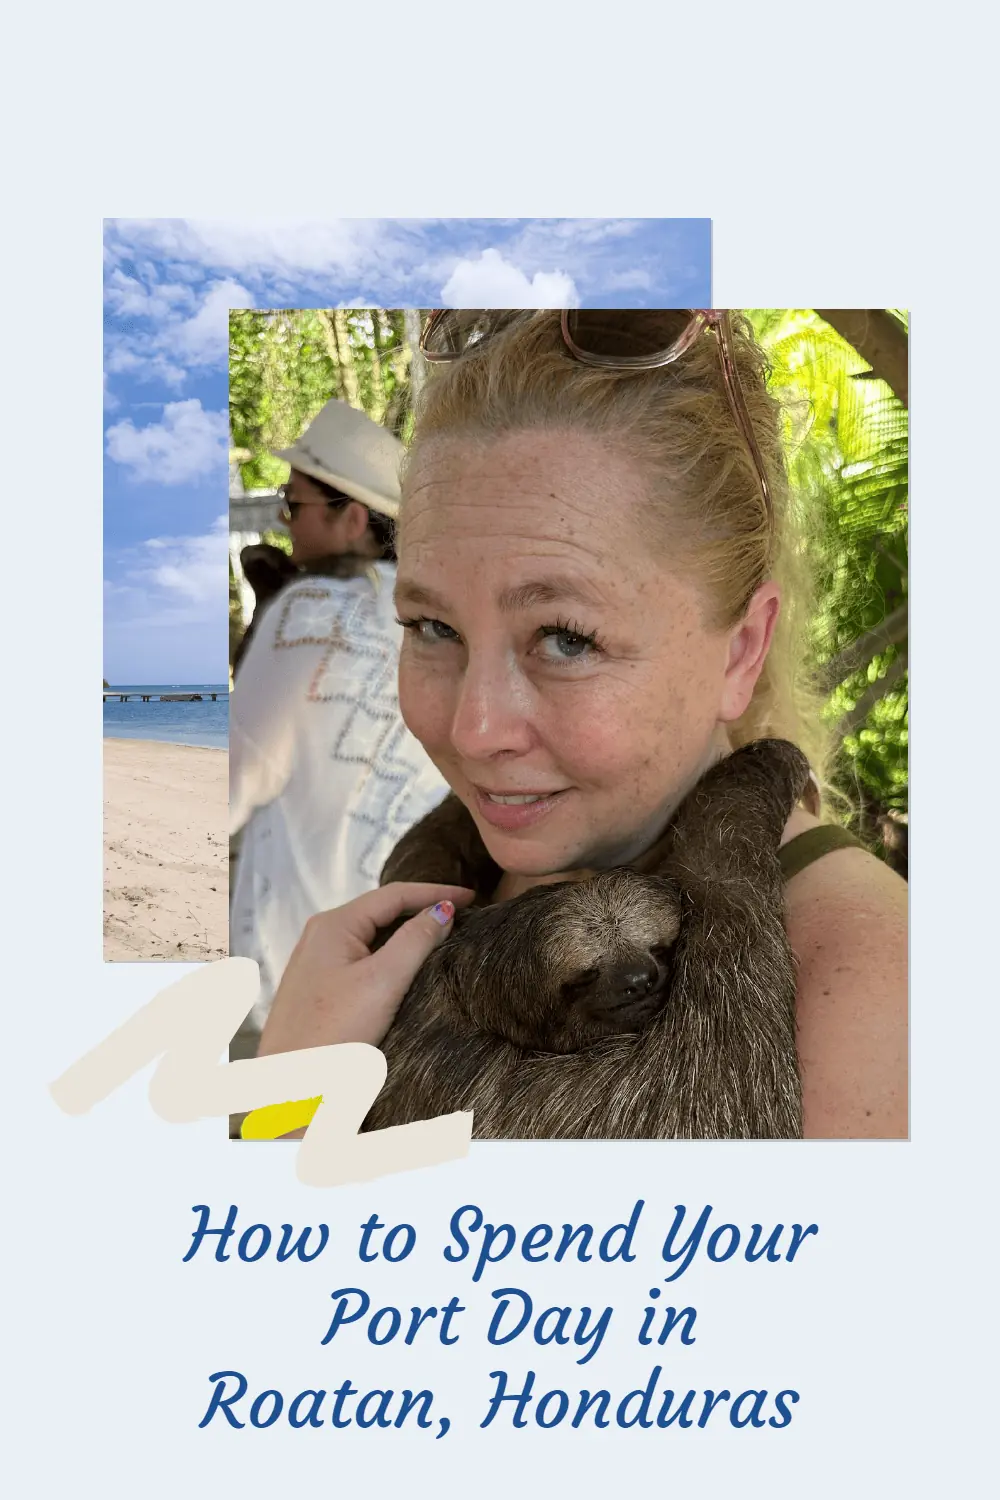 On our Western Caribbean Cruise, we discovered Roatan, Honduras, a diver's paradise and home to the friendly and enchanting sloths. Learn about our eye-opening encounters, from diving along the grand MesioAmerican Barrier Reef System to chilling with our adorable friend, Charlie the sloth. #roatanhonduras #westerncaribbean